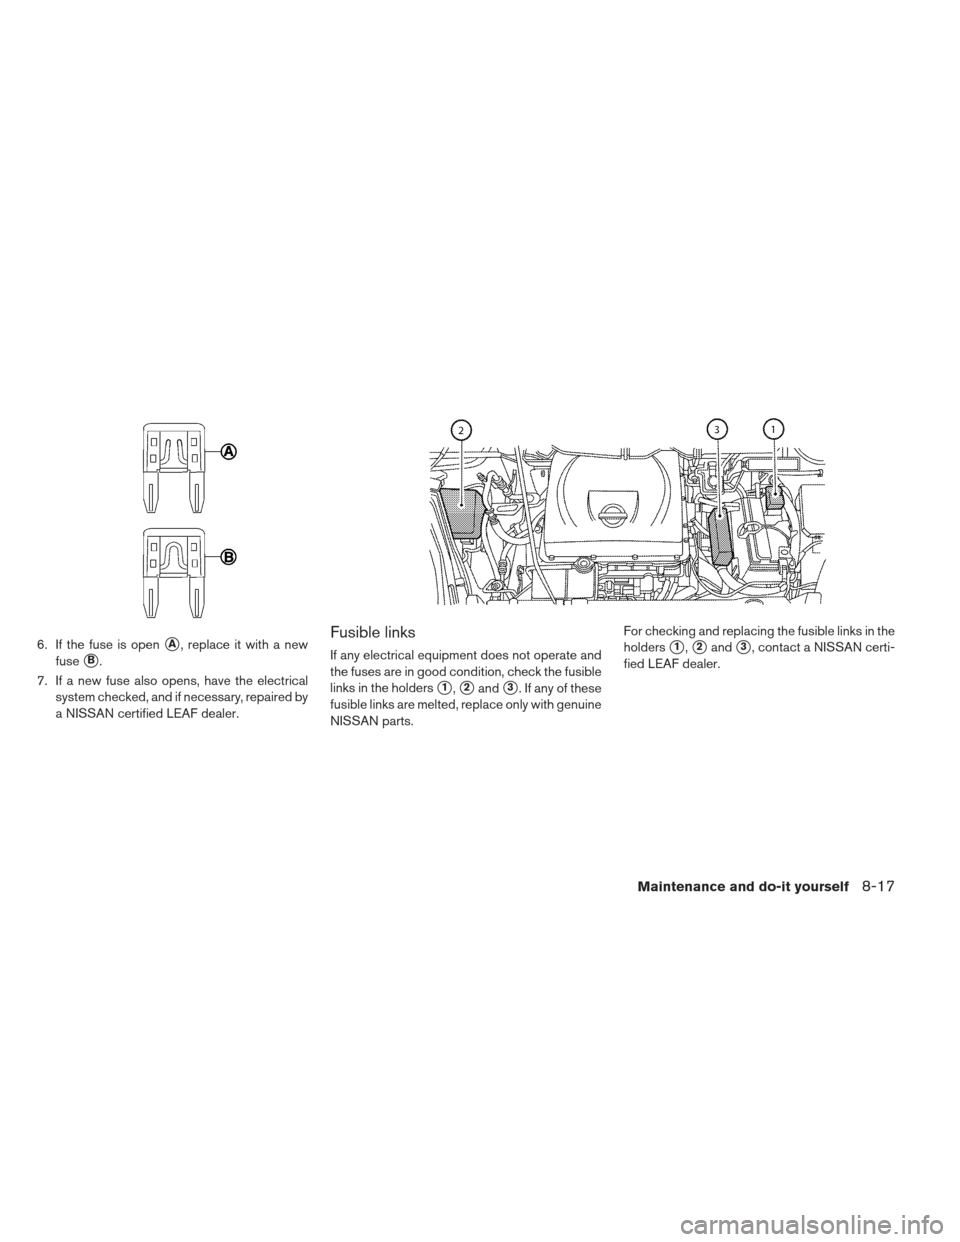 NISSAN LEAF 2013 1.G Owners Manual 6. If the fuse is openA, replace it with a new
fuse
B.
7. If a new fuse also opens, have the electrical system checked, and if necessary, repaired by
a NISSAN certified LEAF dealer.
Fusible links
If